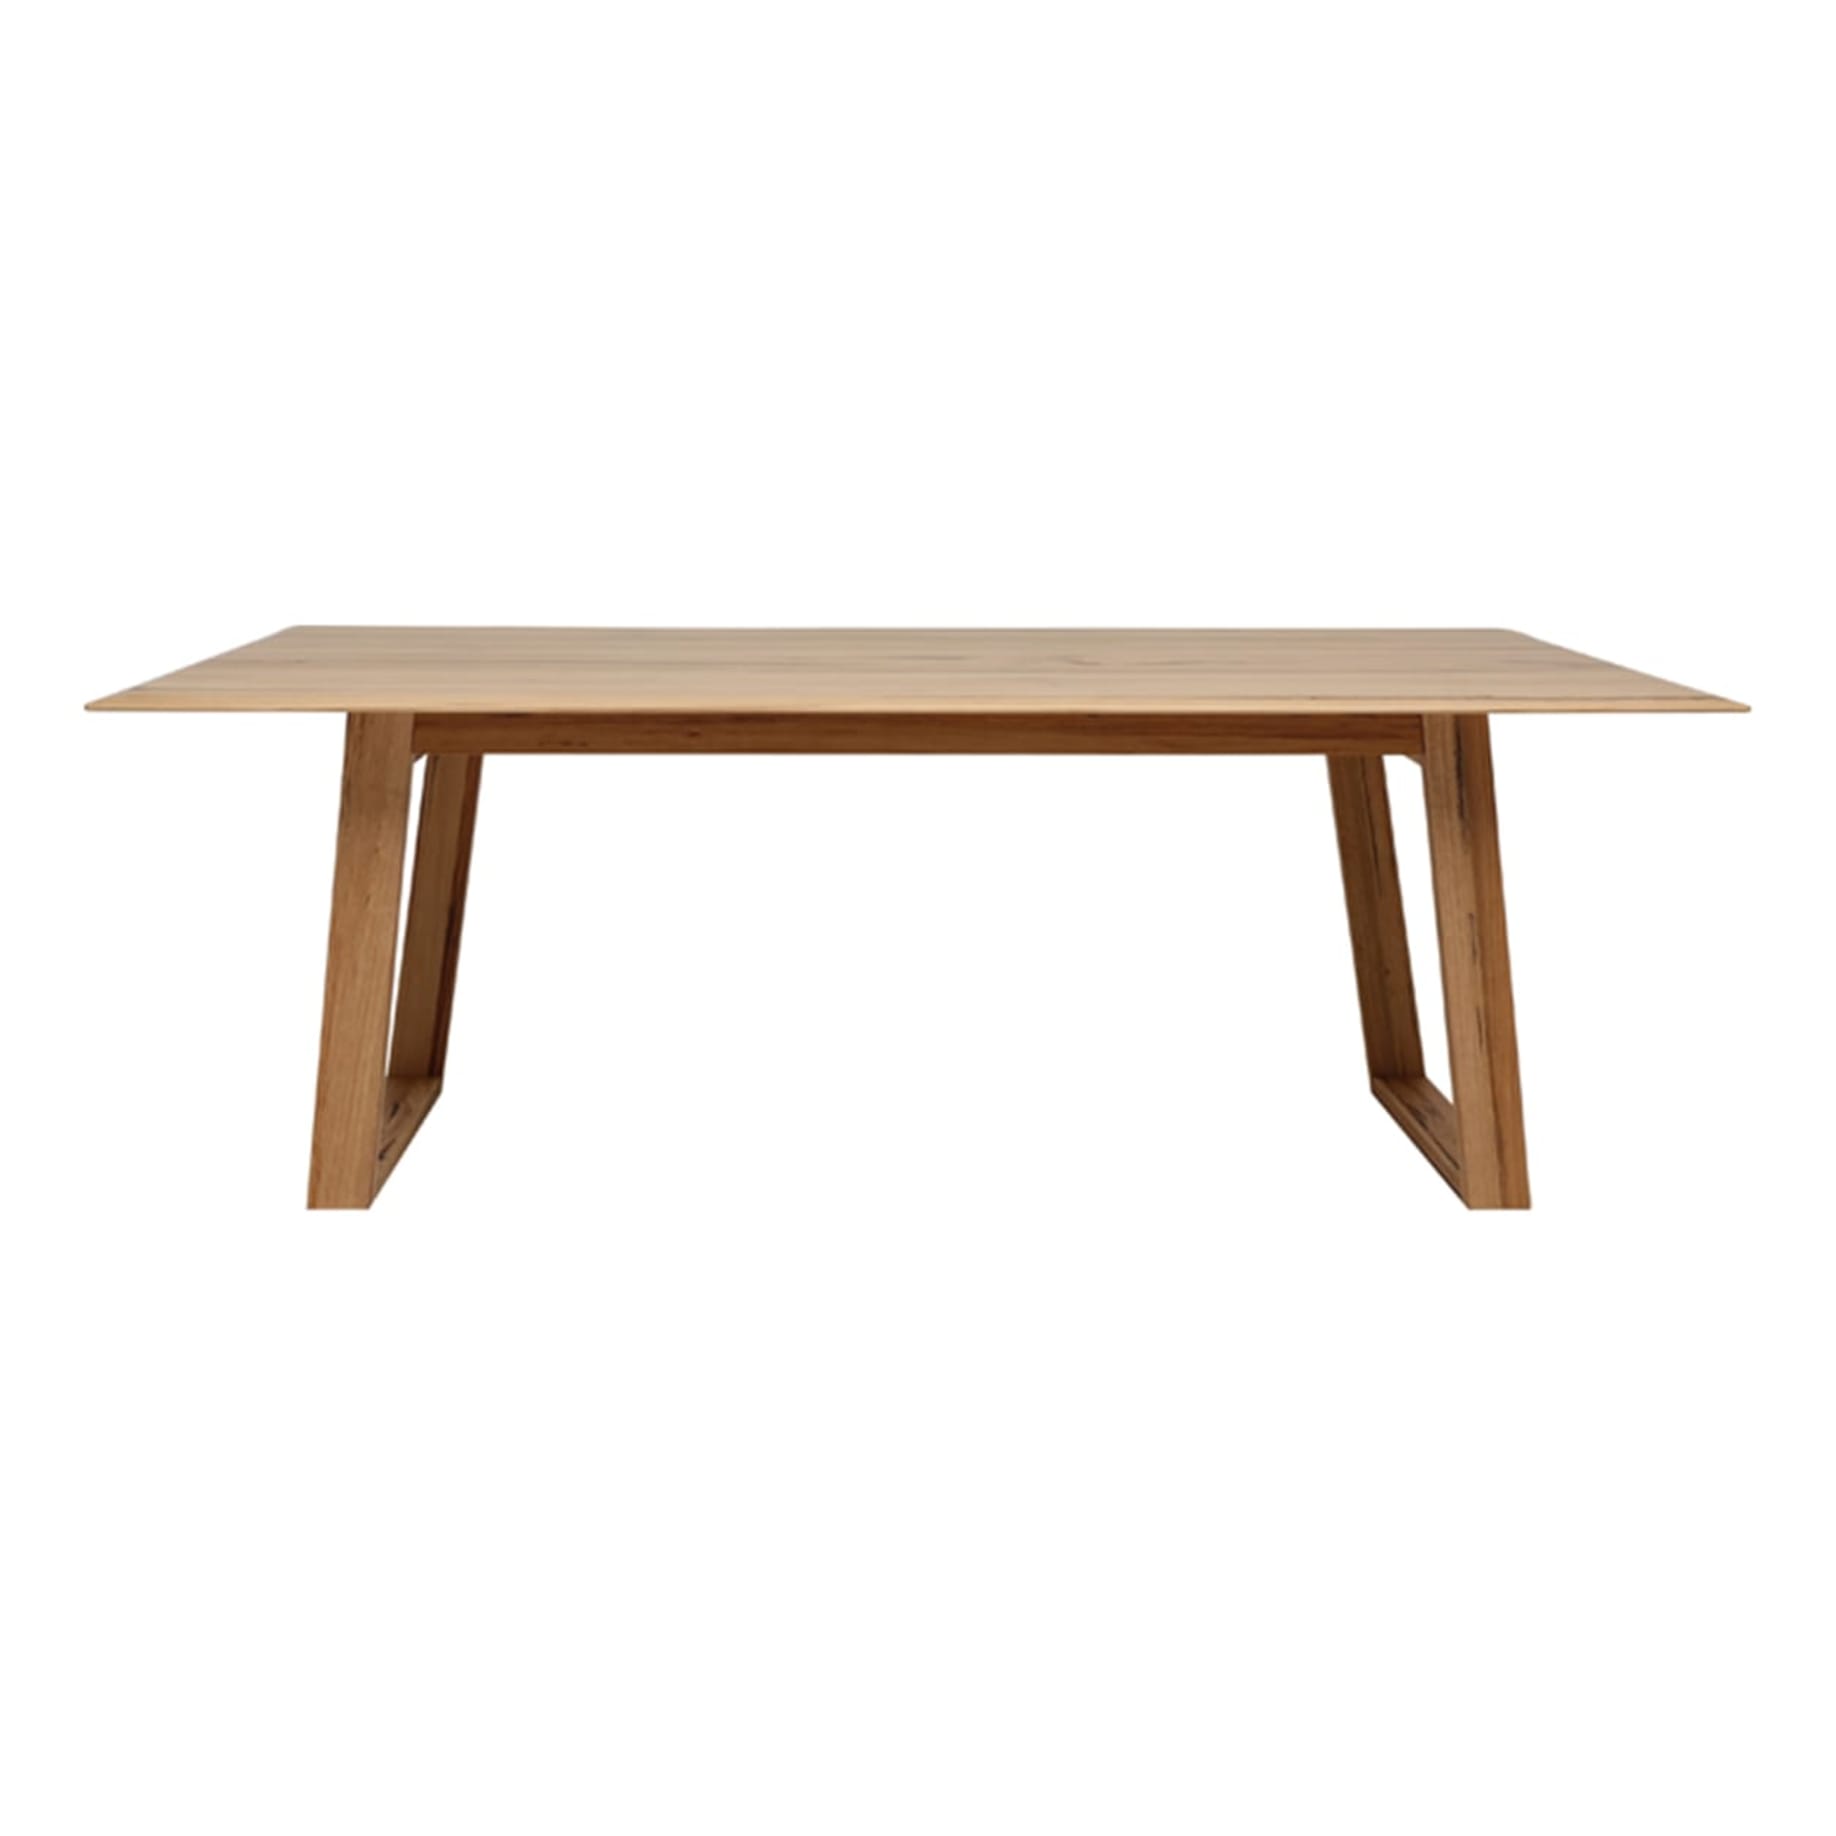 Baxter Dining Table 180cm in Australian Messmate